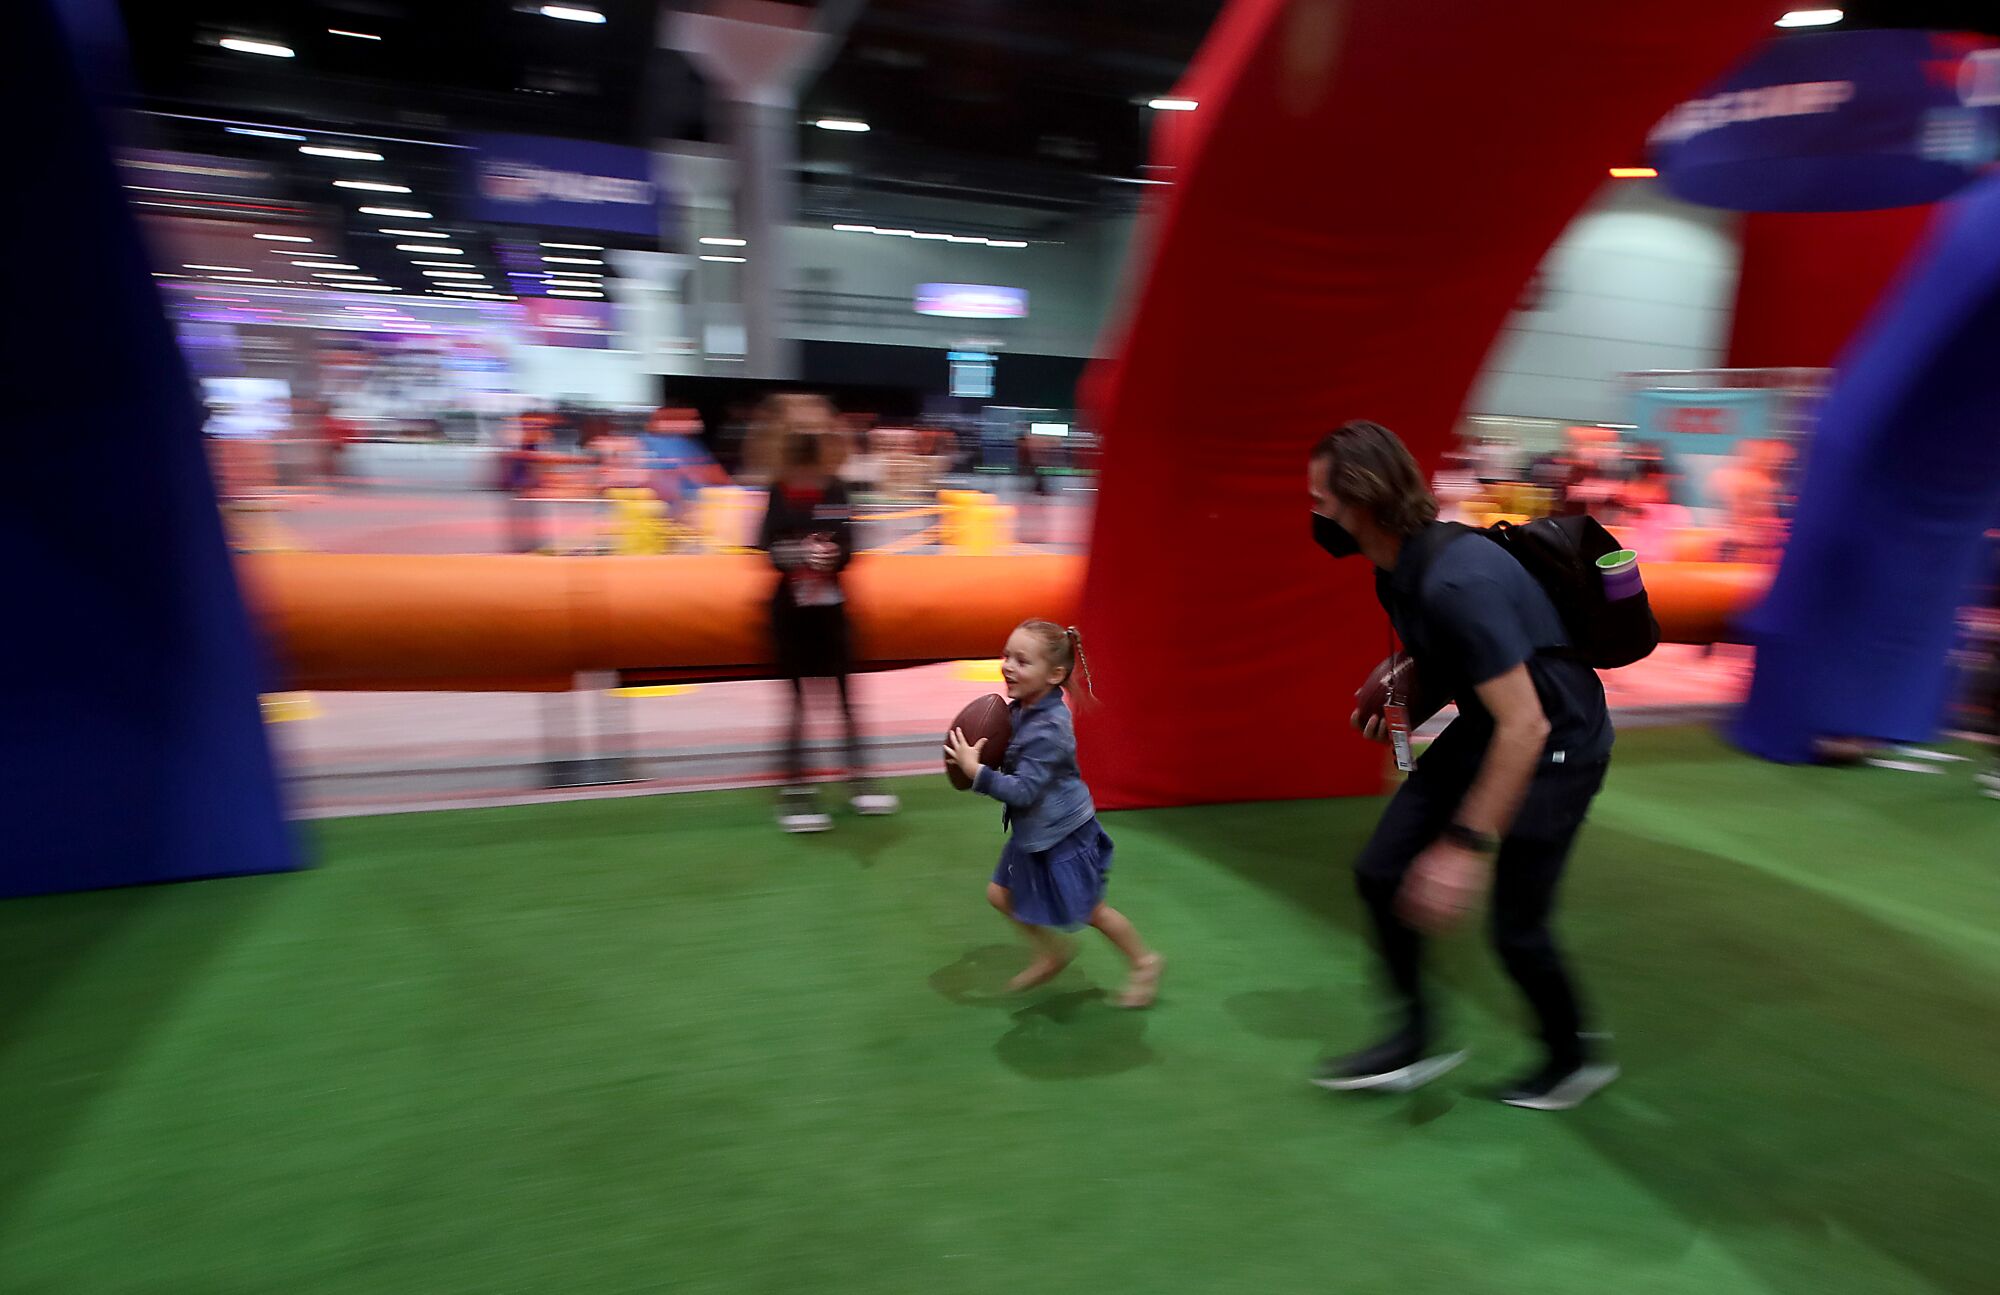 A child runs with a football at the Super Bowl Experience at the L.A. Convention Center.